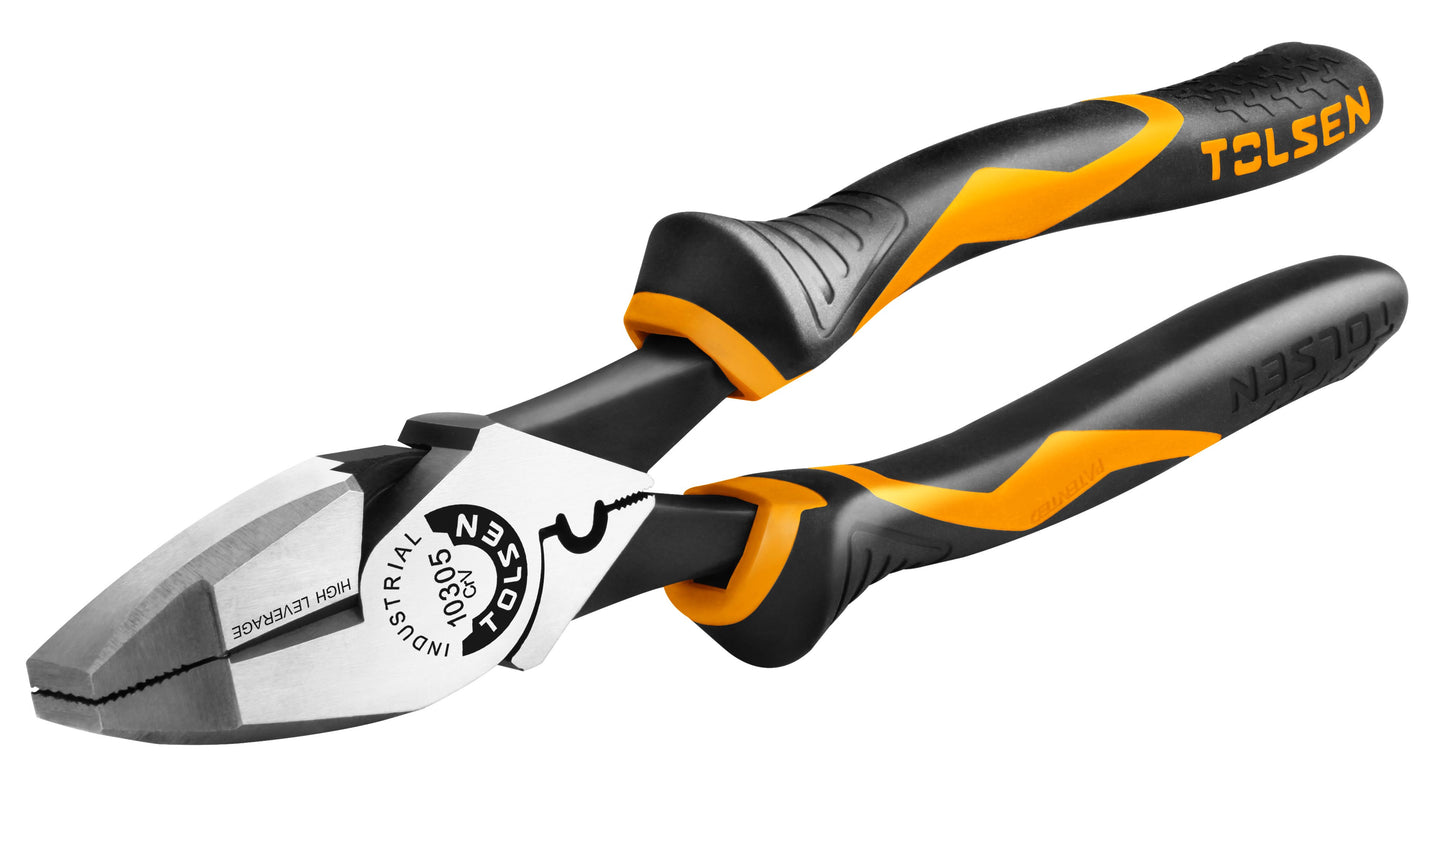 INDUSTRIAL HIGH LEVERAGE SIDE CUTTING PLIERS (9.5")